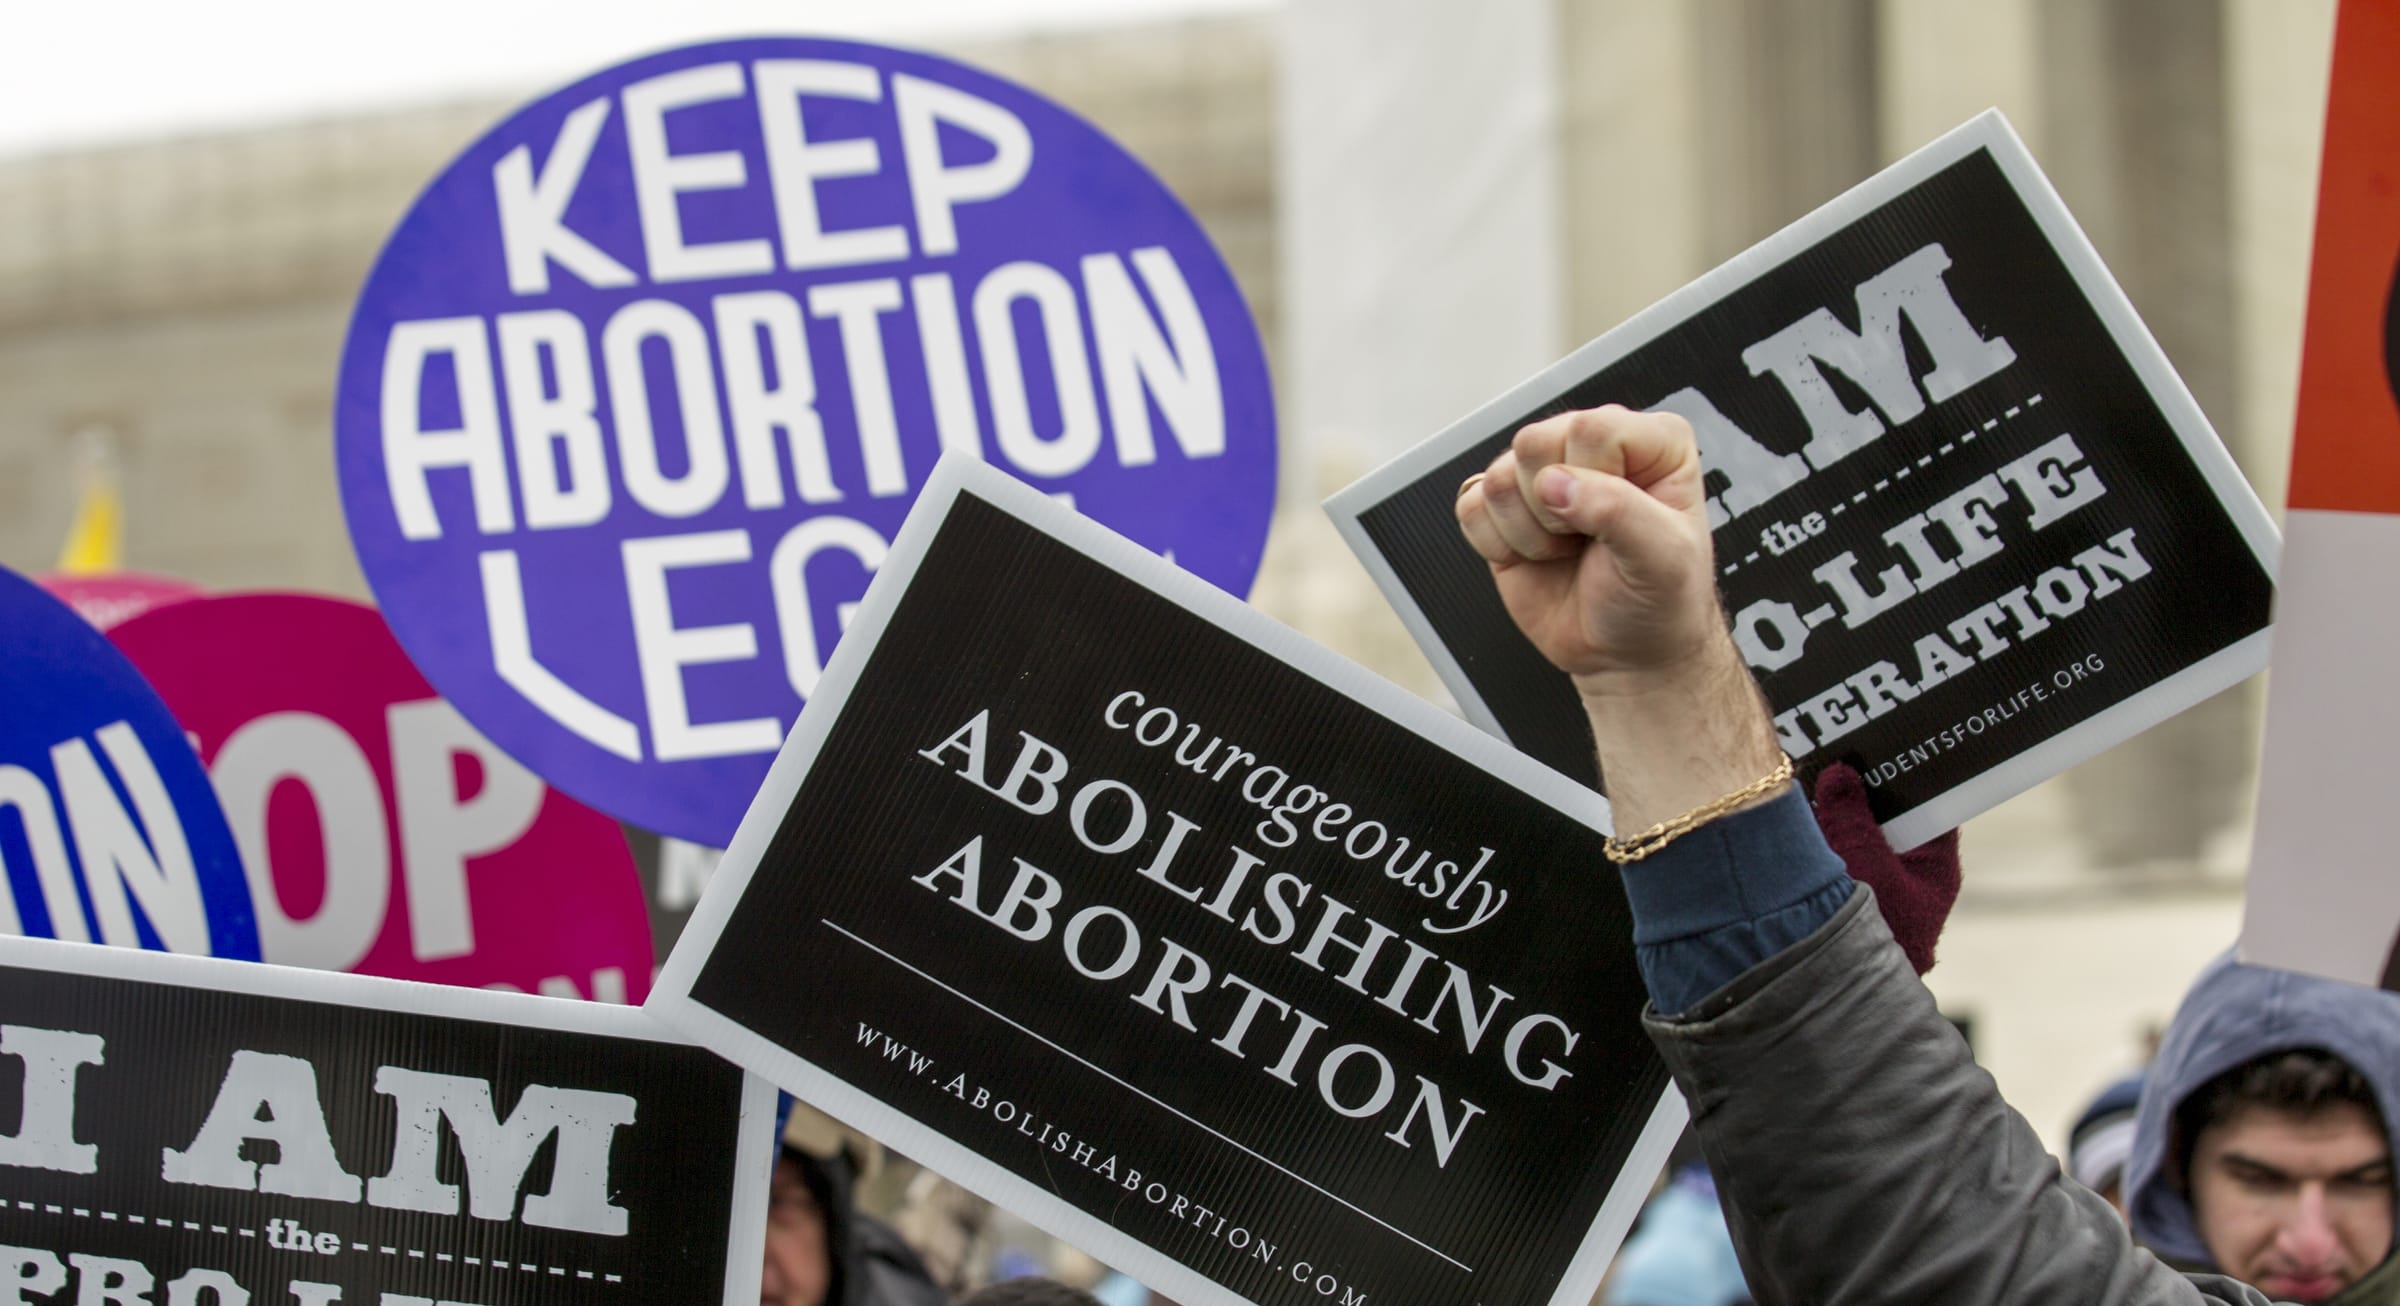 Opposing sides of abortion issue collide in front of Supreme Court